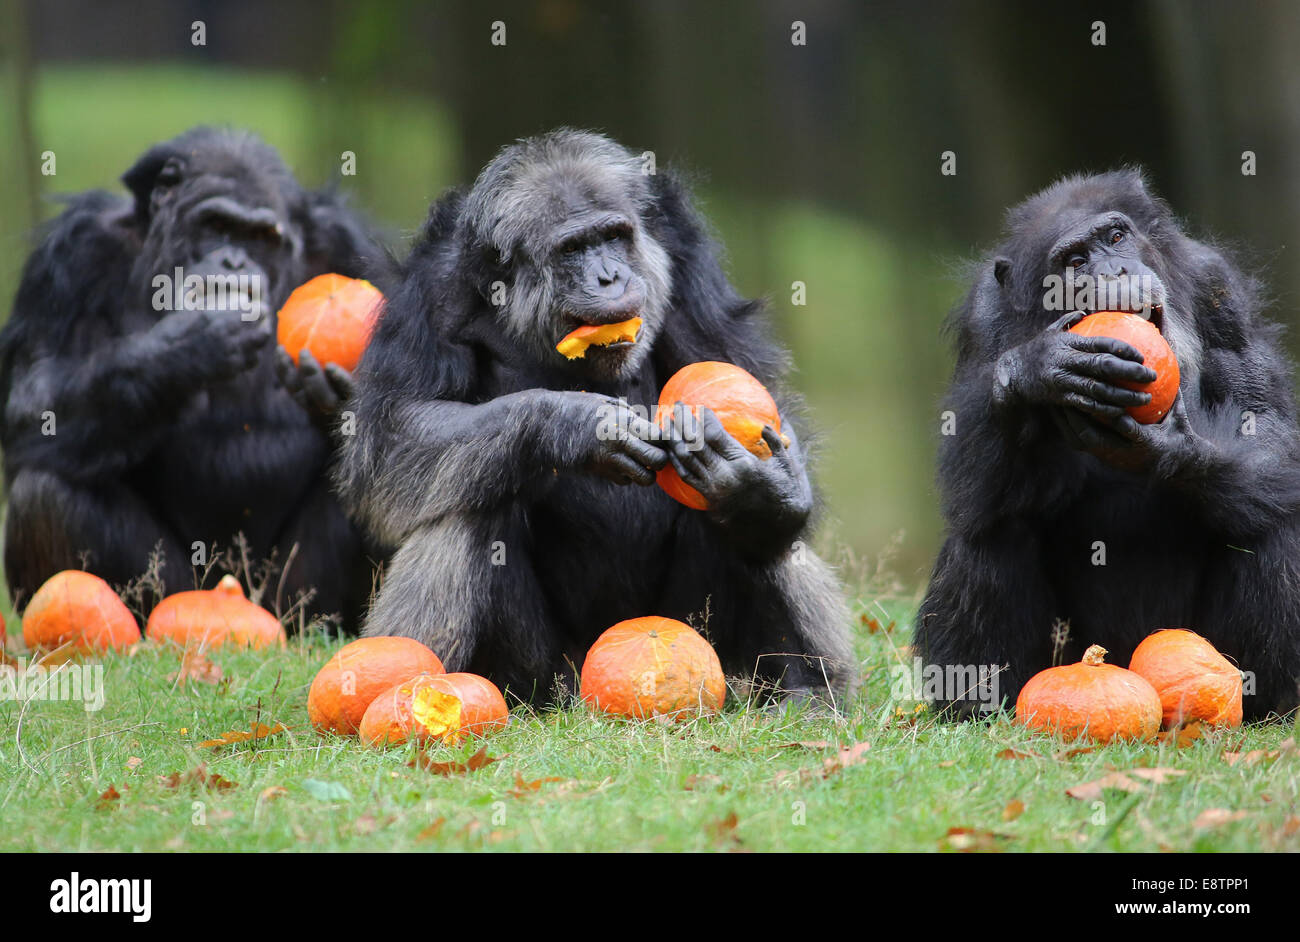 Arnhem, Netherlands. 14th October, 2014. ARNHEM - A happy family dinner. A special autumn surprise for the chimpanzees at Burgers' Zoo in the Dutch city Arnhem Tuesday 14-10-2014. Because the autumn holidays, the animals got a real family dinner with exclusive pumpkins. Because it is not a regular surprise everyday, the apes allowed themselves to taste the delicacy extra sapor. Pumpkins are only available in the fall and were serve by the caretakers as enrichment of the daily well-balanced meals. Credit:  dpa picture alliance/Alamy Live News Stock Photo